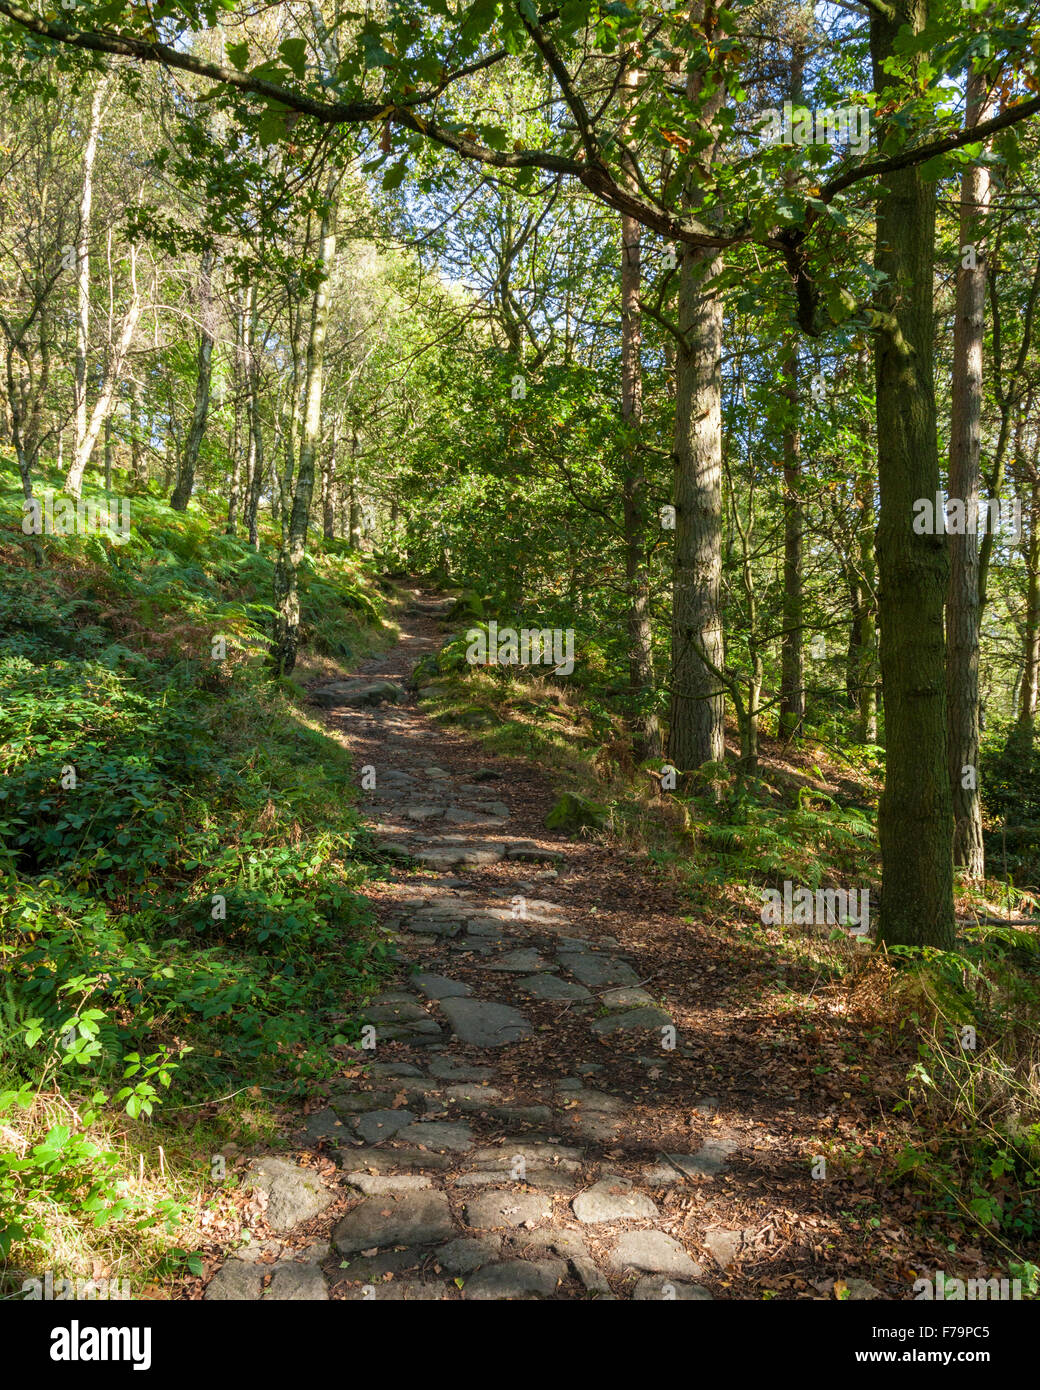 Stone path through trees in Autumn sunlight. Ancient woodland in Padley Gorge, Derbyshire, Peak District National Park, England, UK Stock Photo